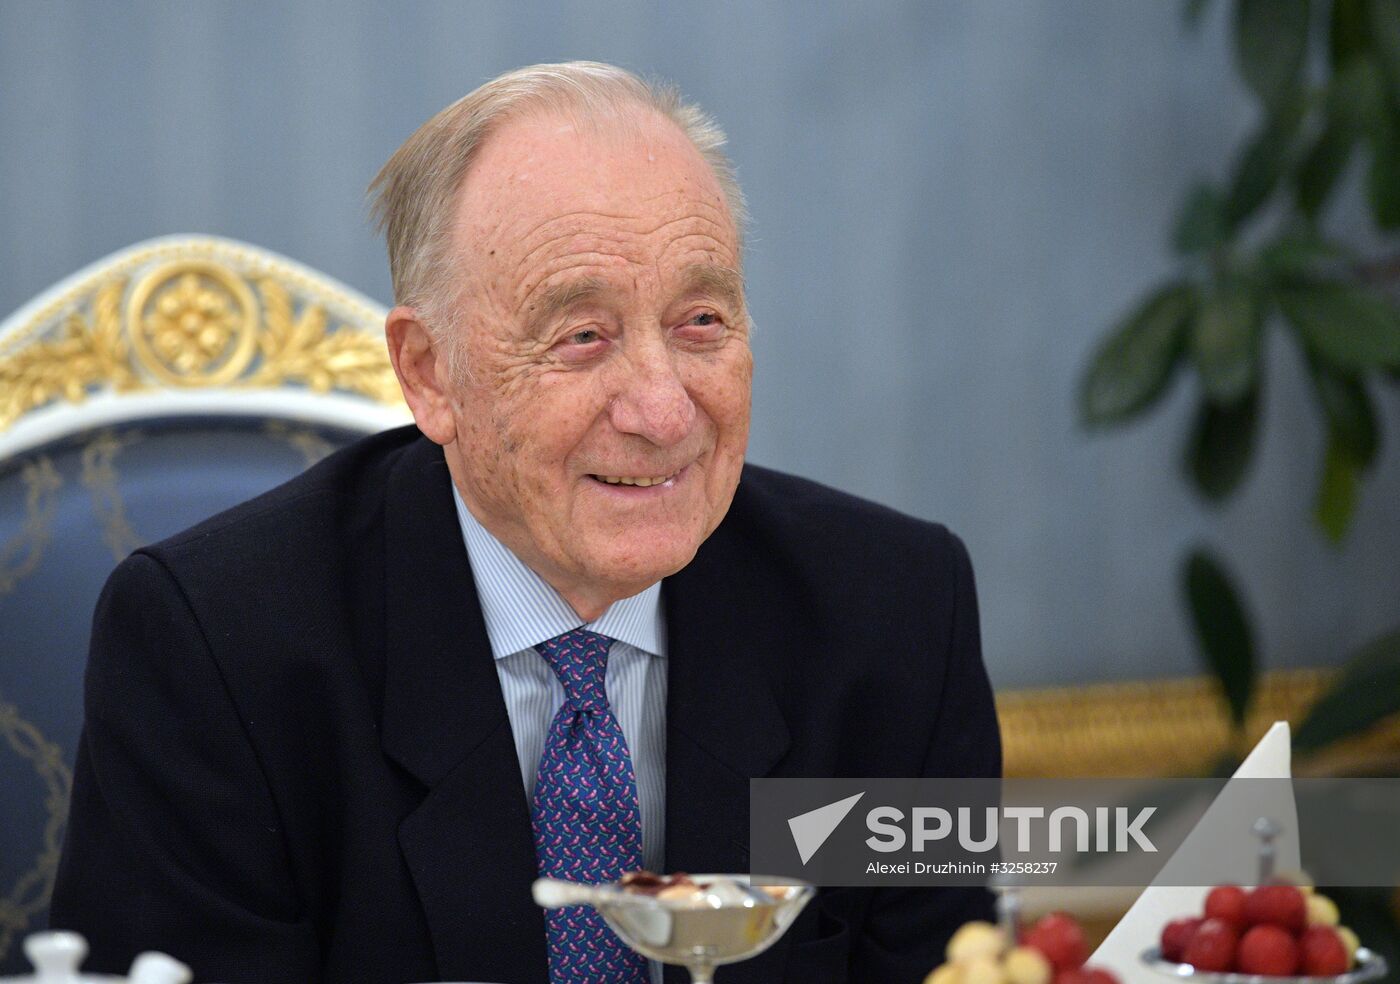 President Putin wished happy 85th birthday to People's Artist of the USSR composer Rodion Shchedrin